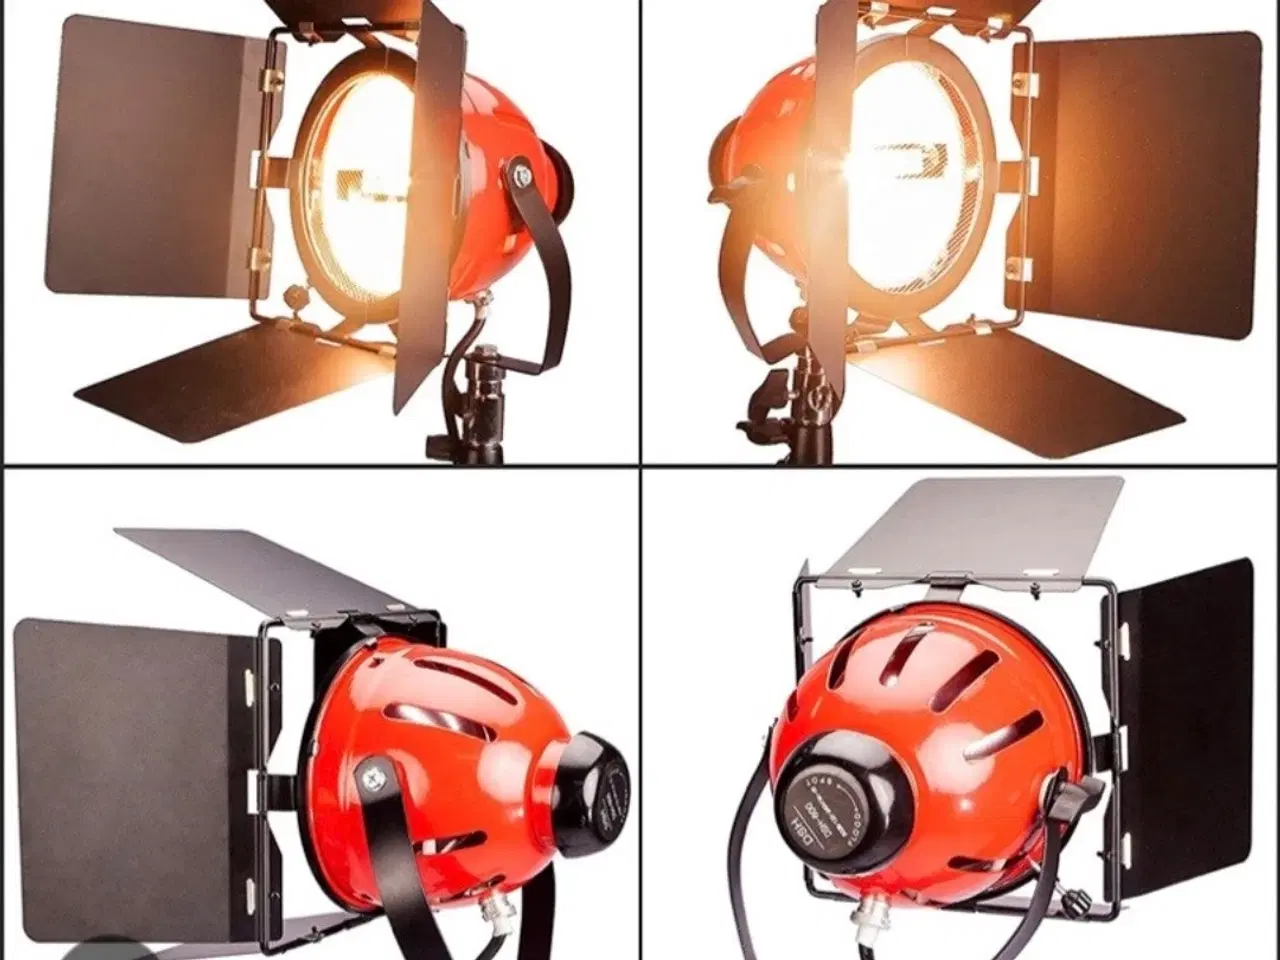 Billede 2 - 3 REDHEAD STUDIO lights with dimmer switches